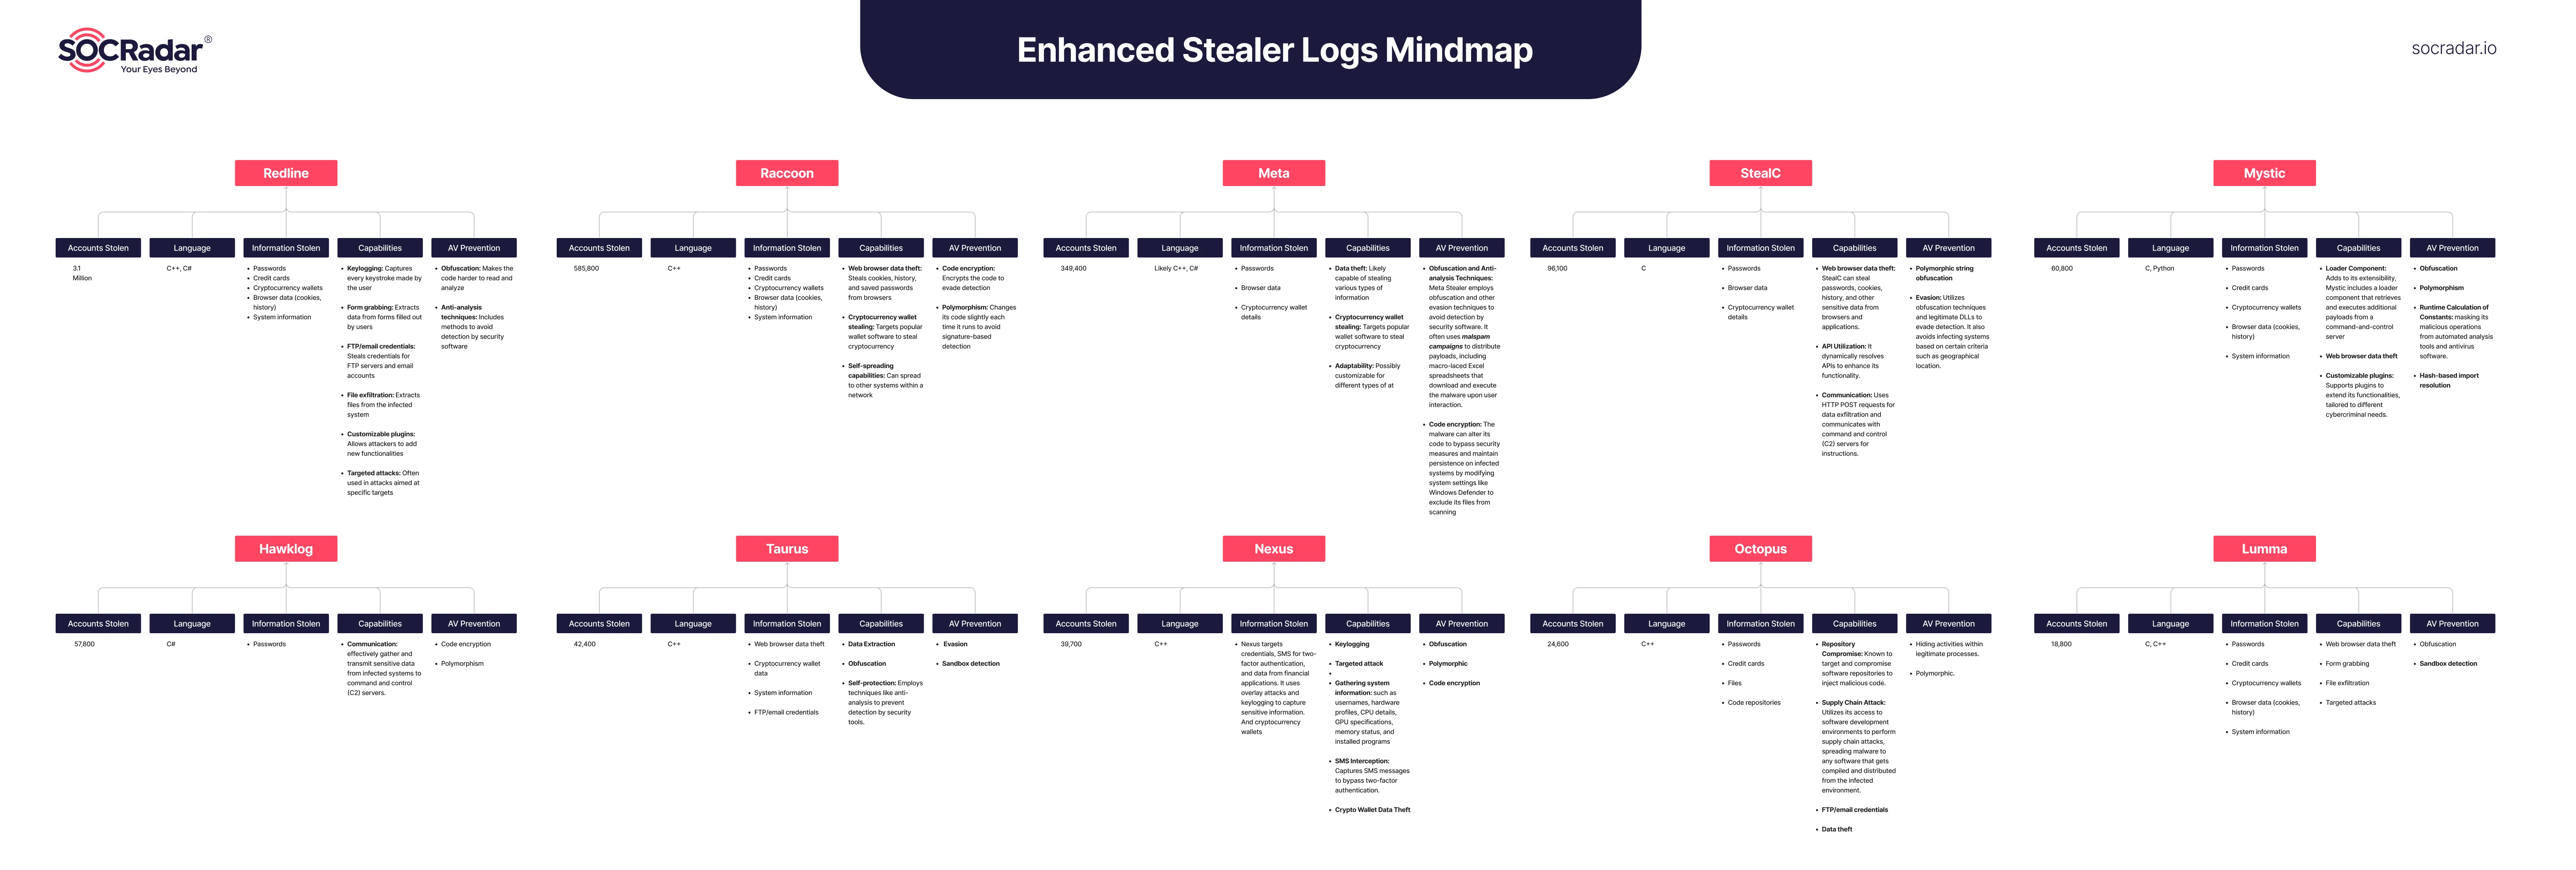 A mind map of the Top 10 Stealer Logs